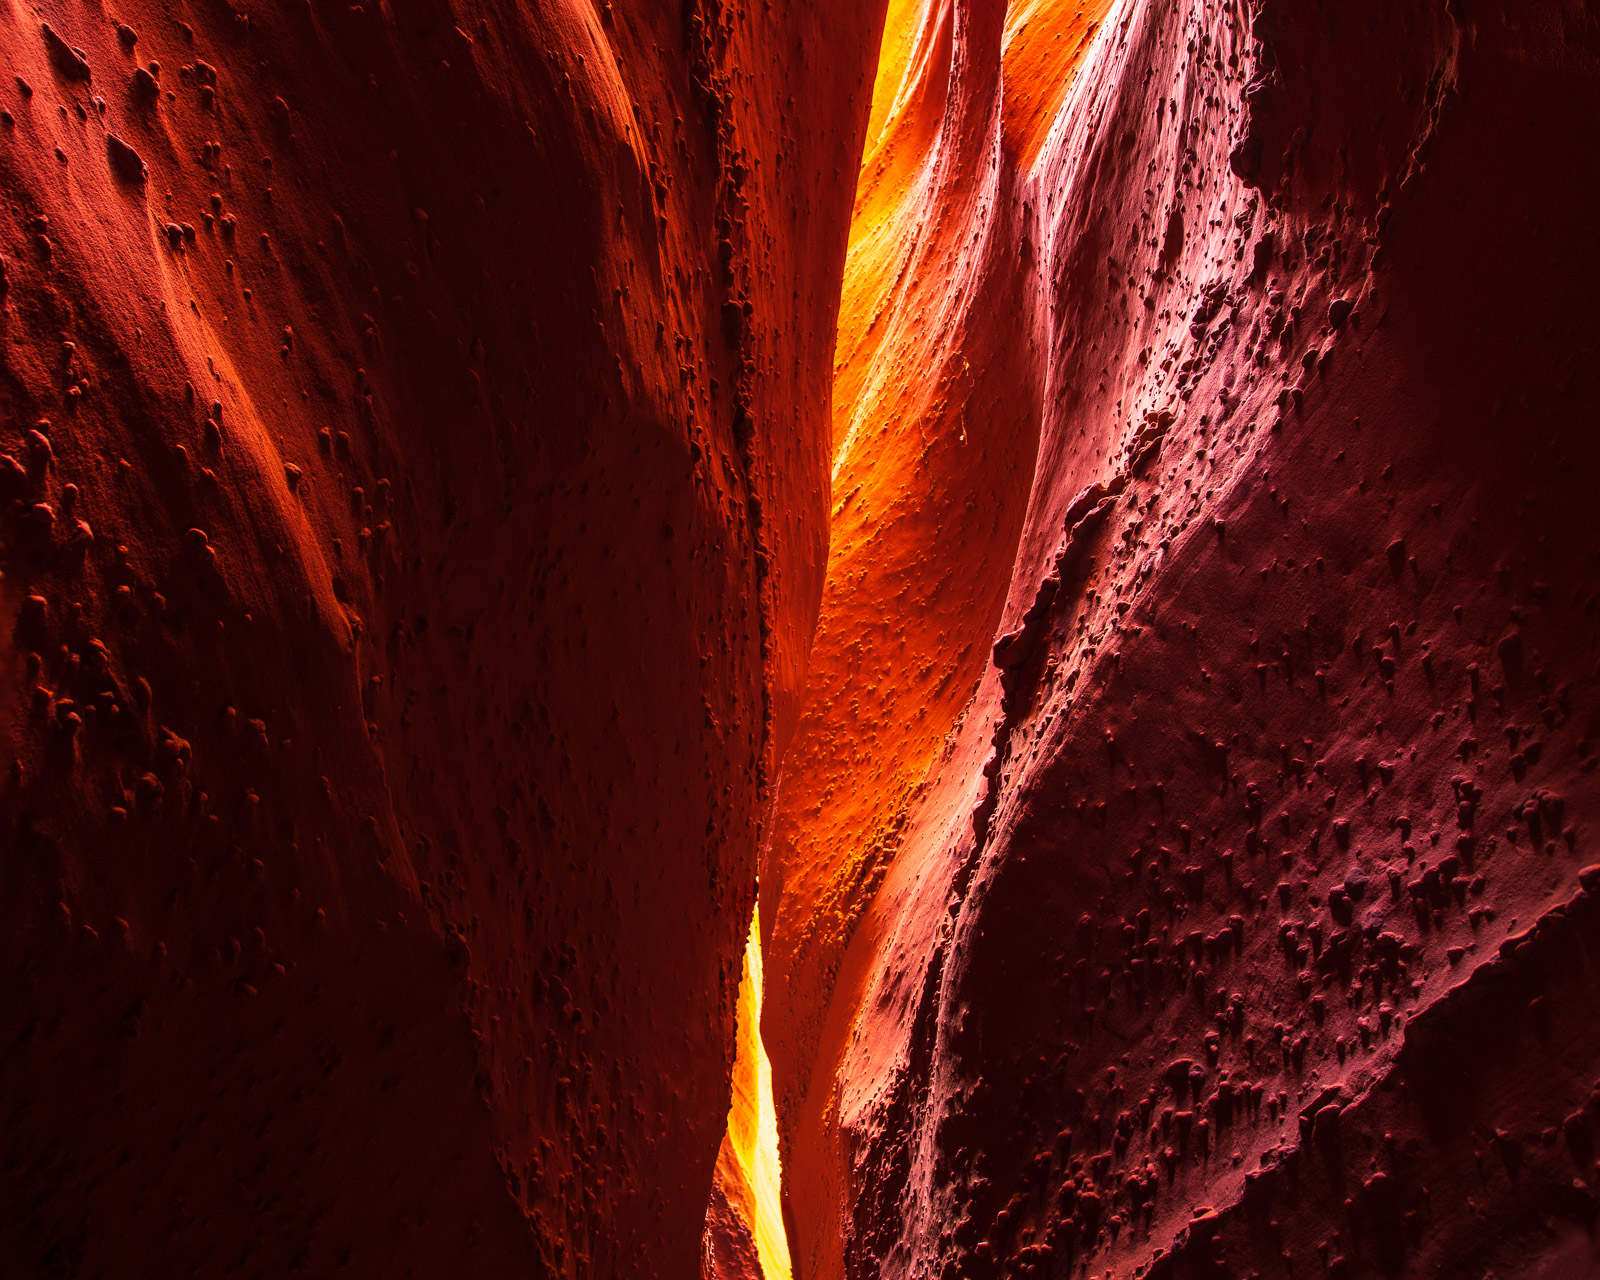 Glowing canyon walls inside of Spooky Gulch, Grand Staircase/Escalante National Monument, Utah.